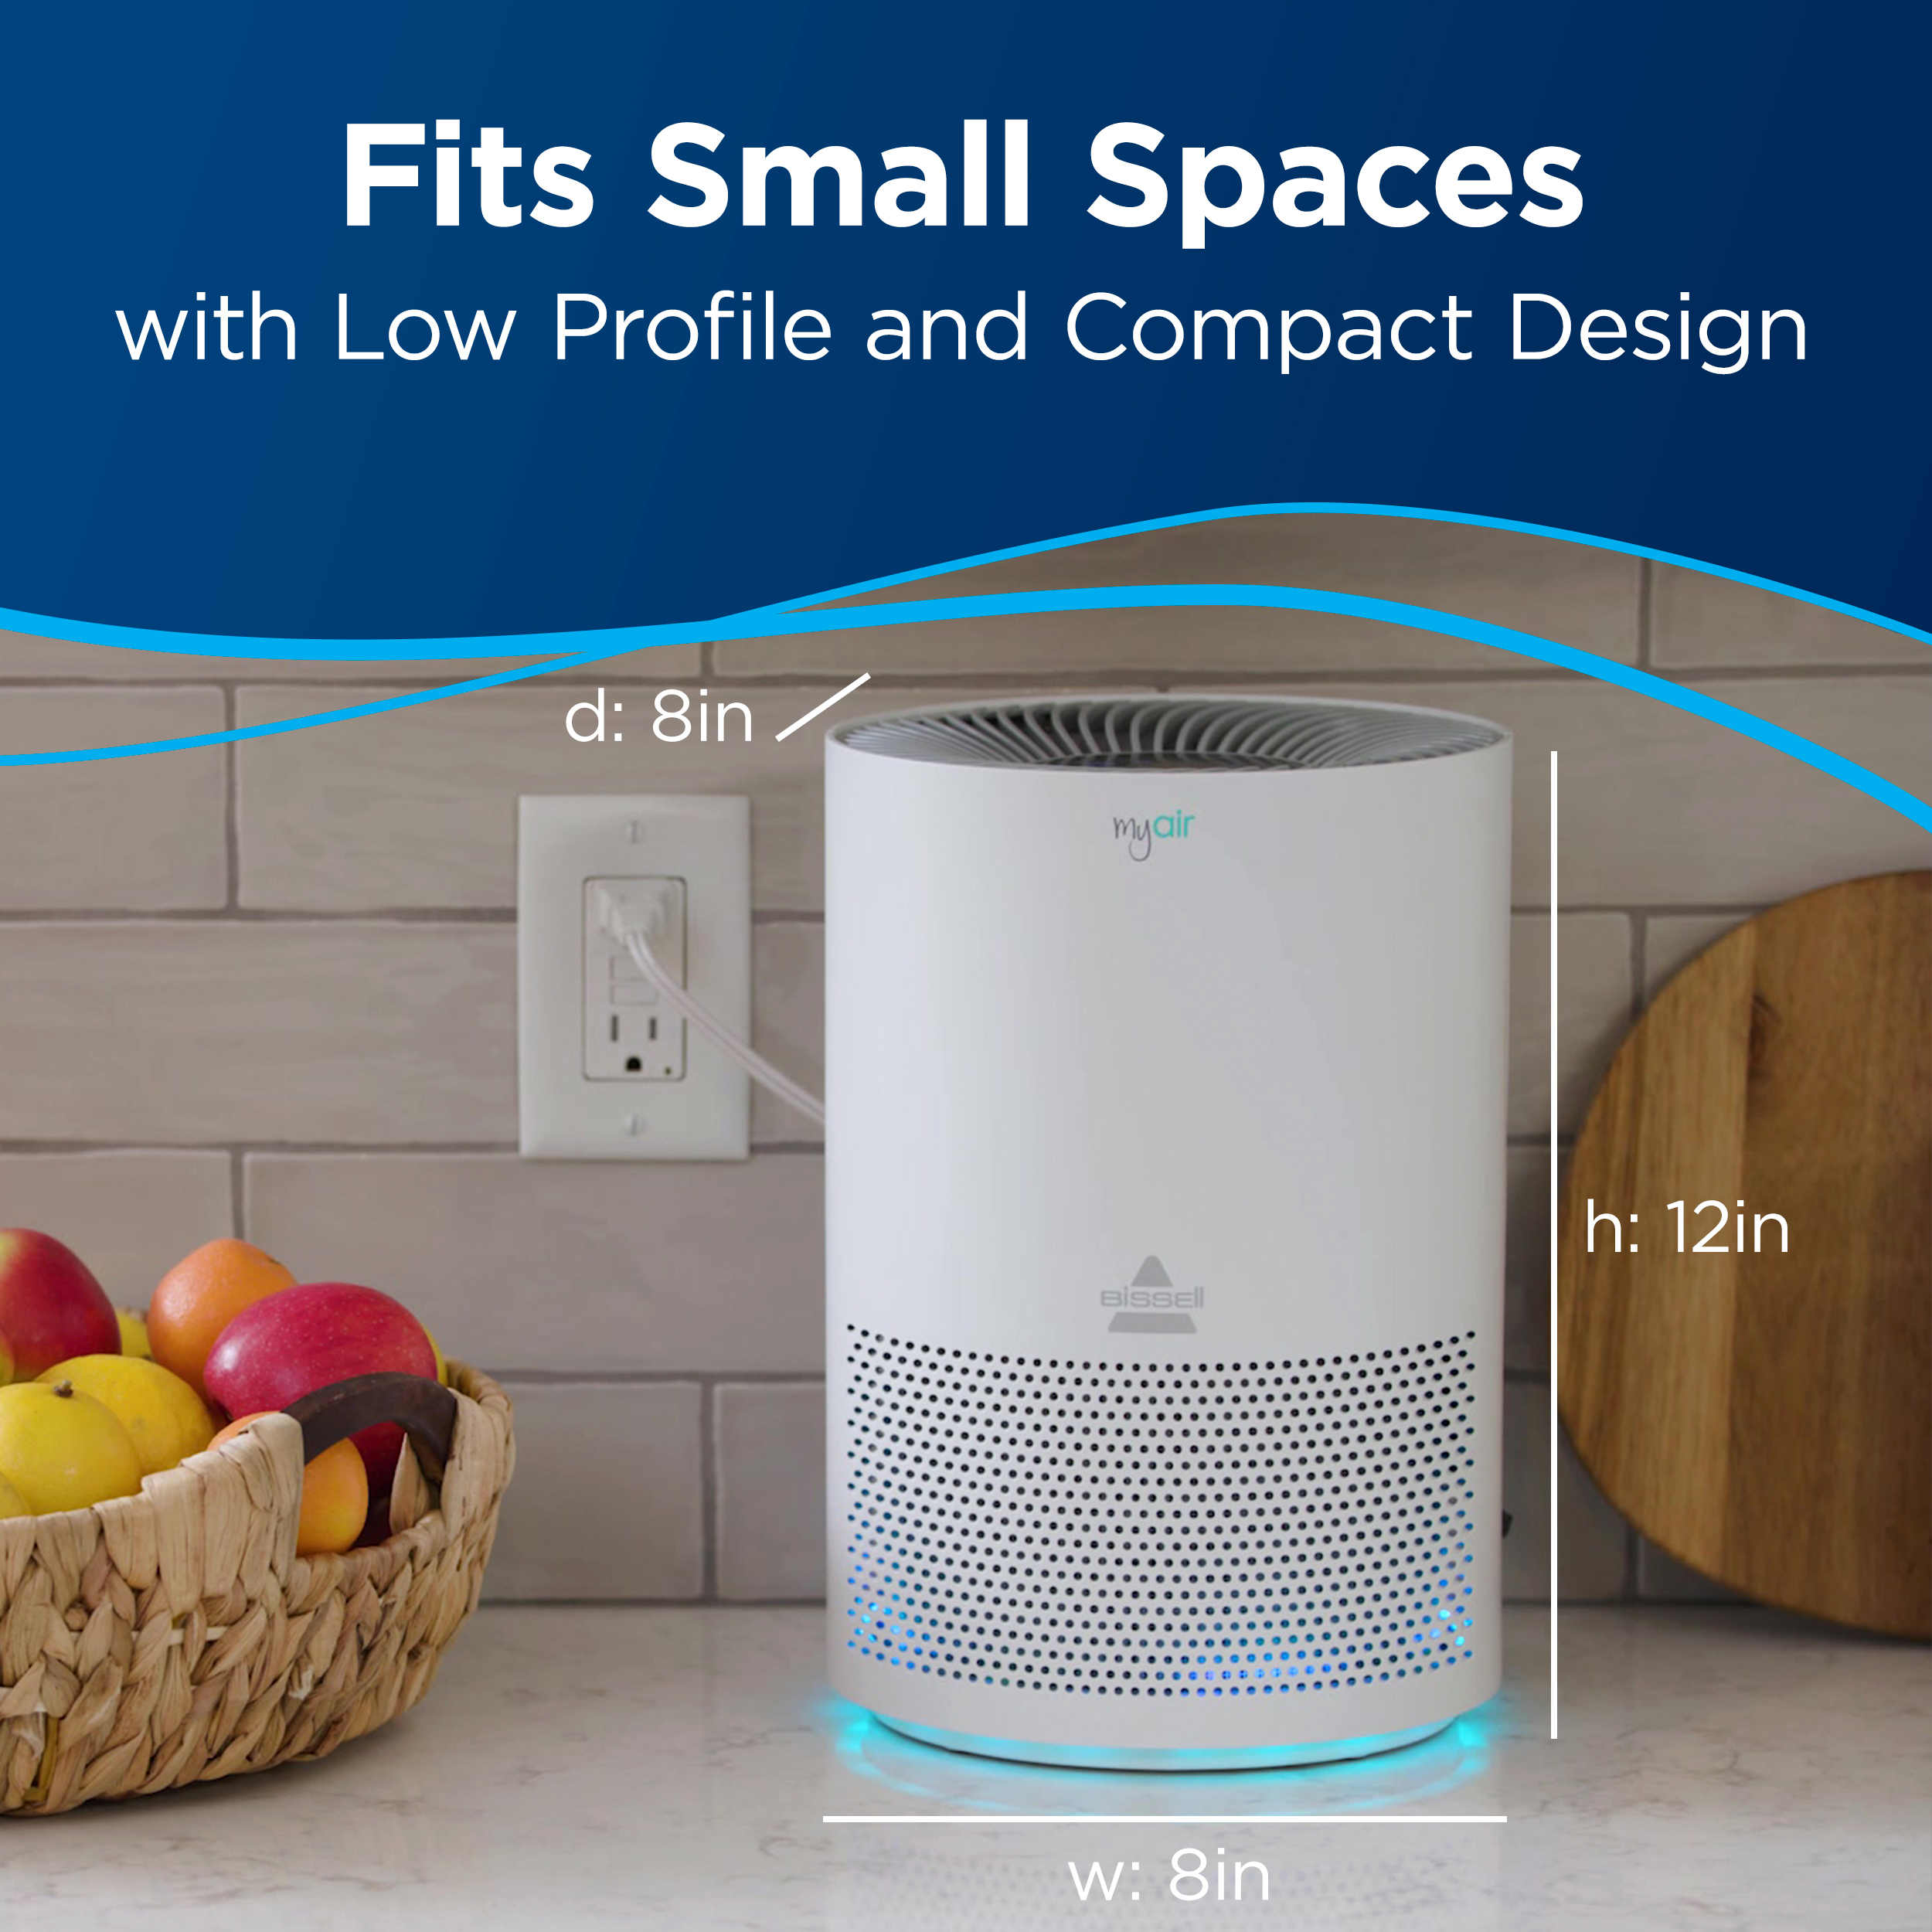 BISSELL MyAir Personal Air Purifier, for rooms up to 100 sq. ft., 2780A - image 5 of 8